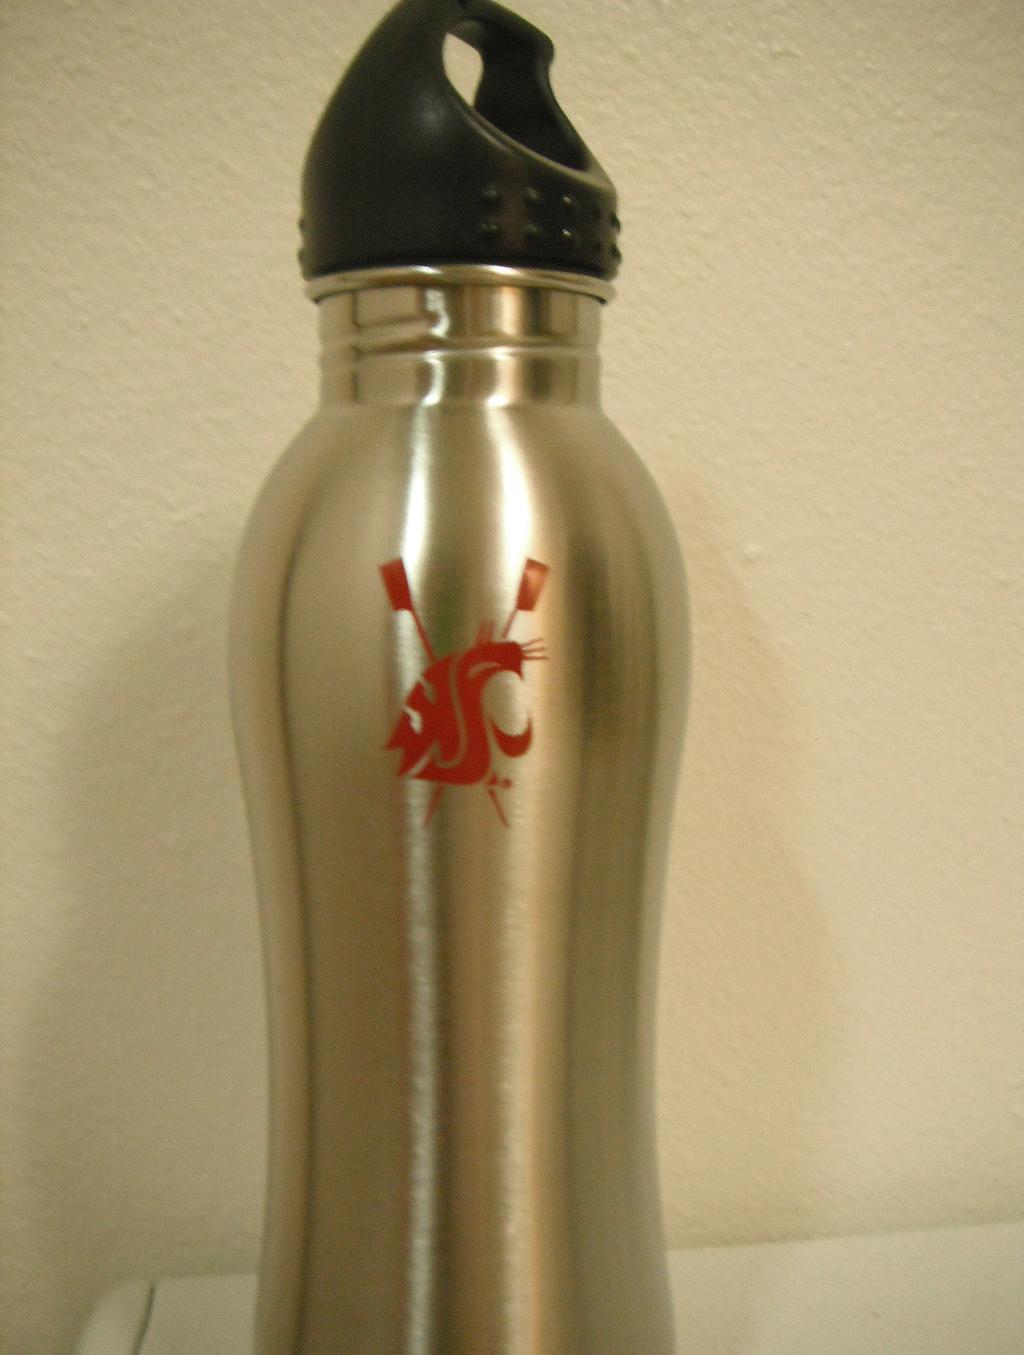 00 Type: Fleece with embroidered logo WSU Crew Water Bottle This